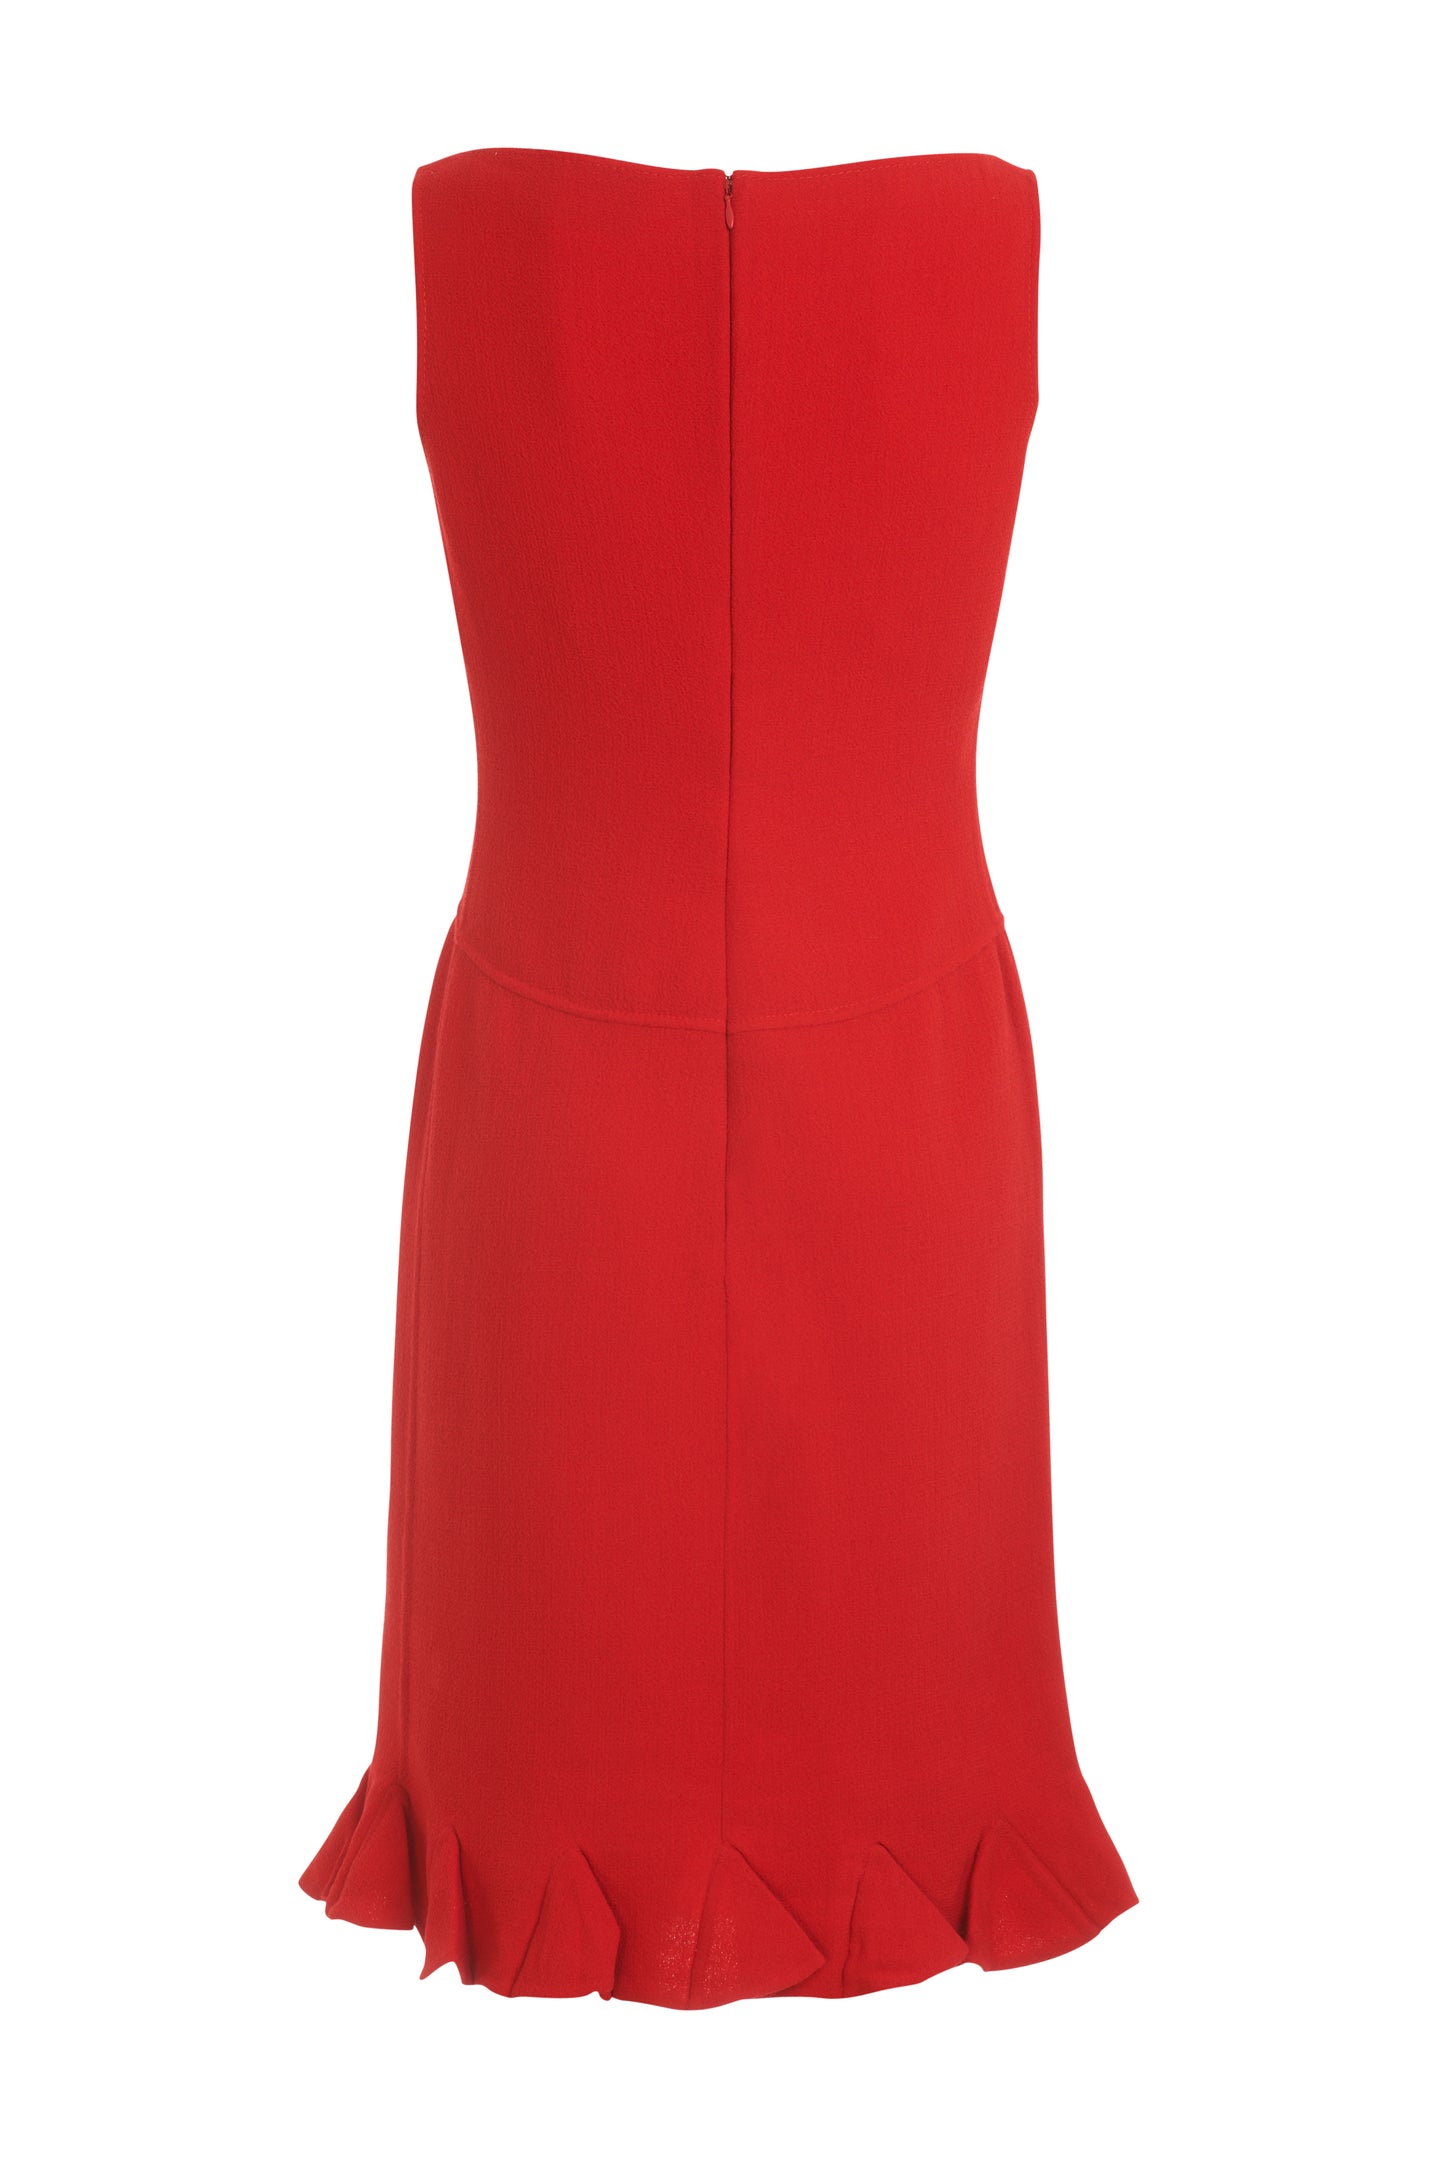 Valentino Boutique red sleeveless wool shift dress